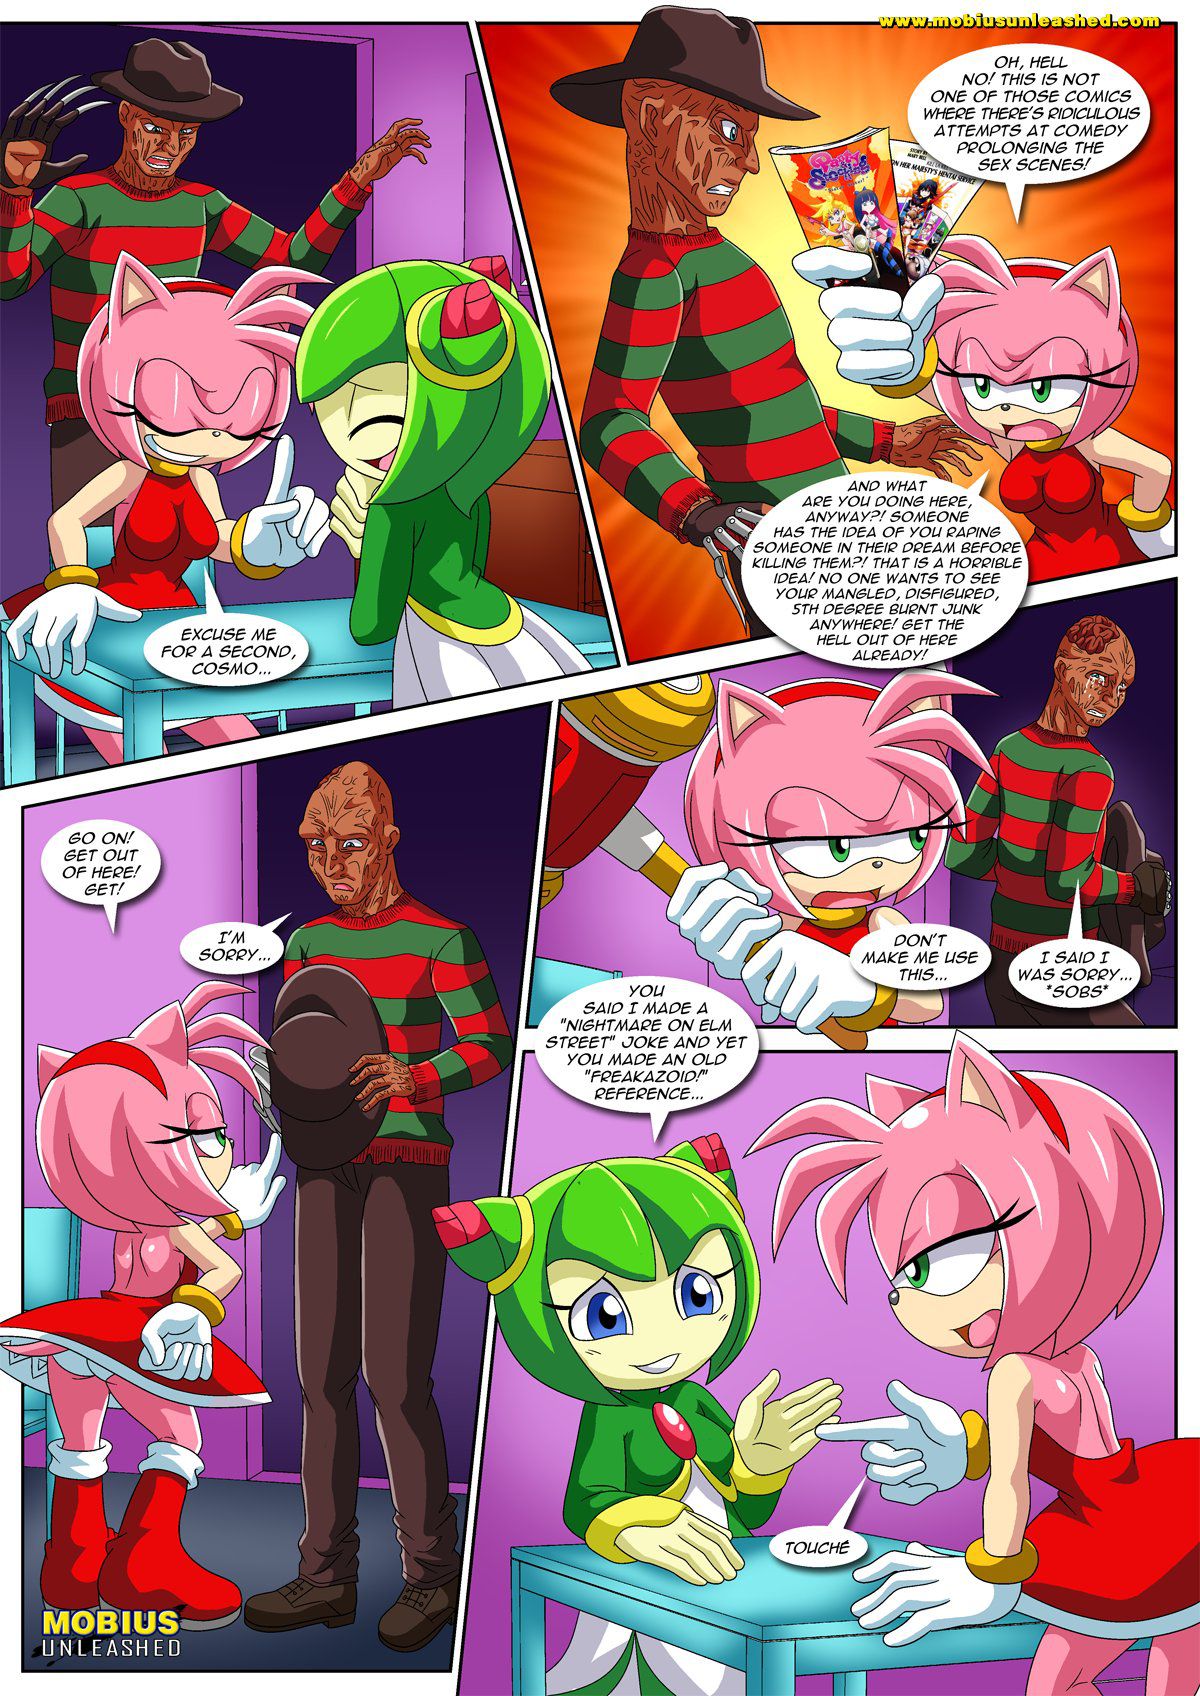 [Palcomix] Team GF's Tentacled Tale (Sonic The Hedgehog) [Ongoing] 3